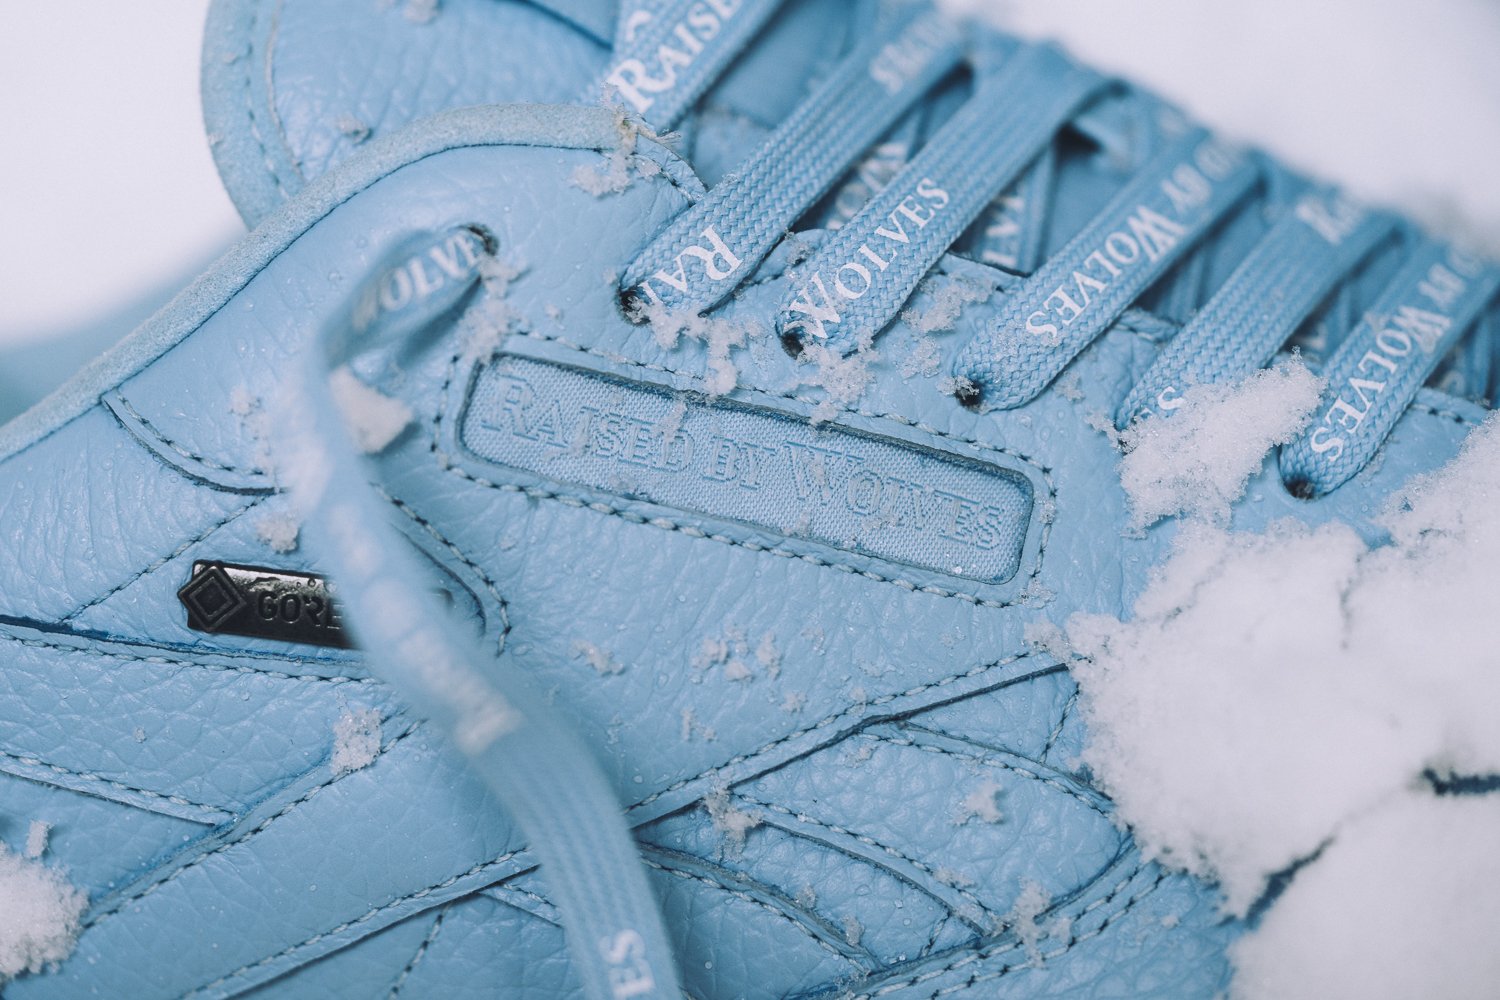 Raised By Wolves x Reebok Classic Ripple Gore-Tex Pack